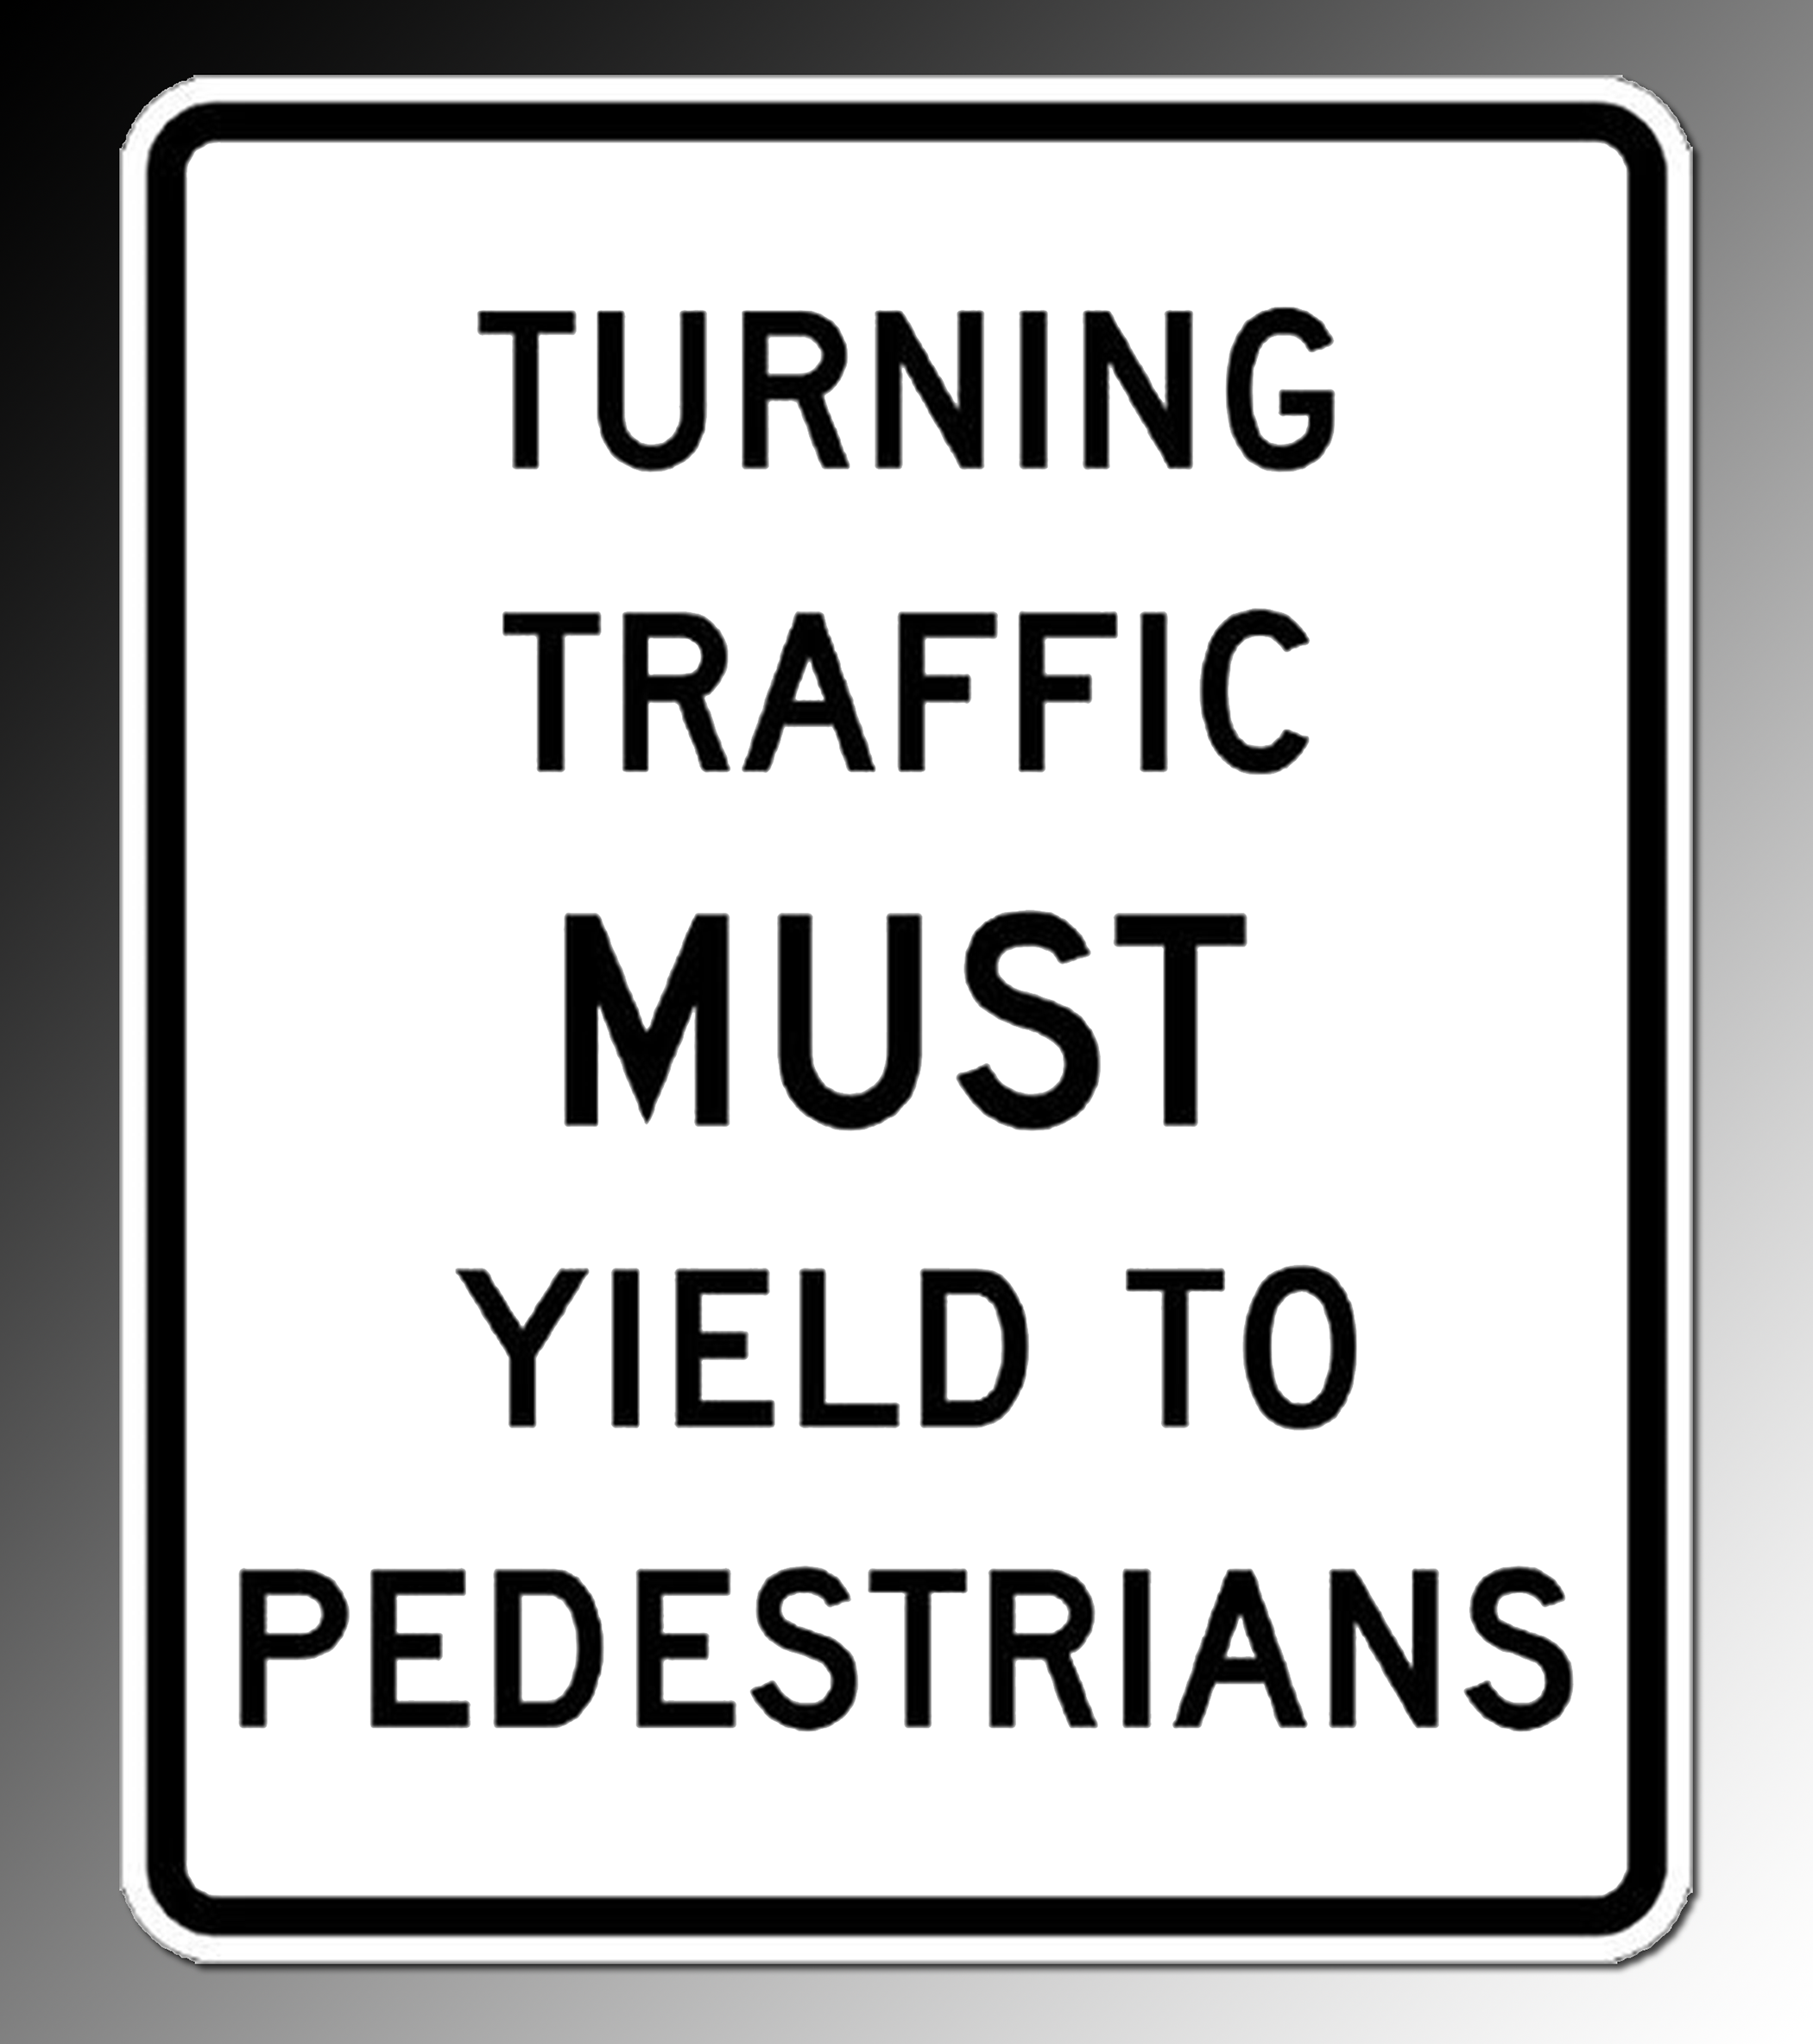 Yield to Pedestrians Sign